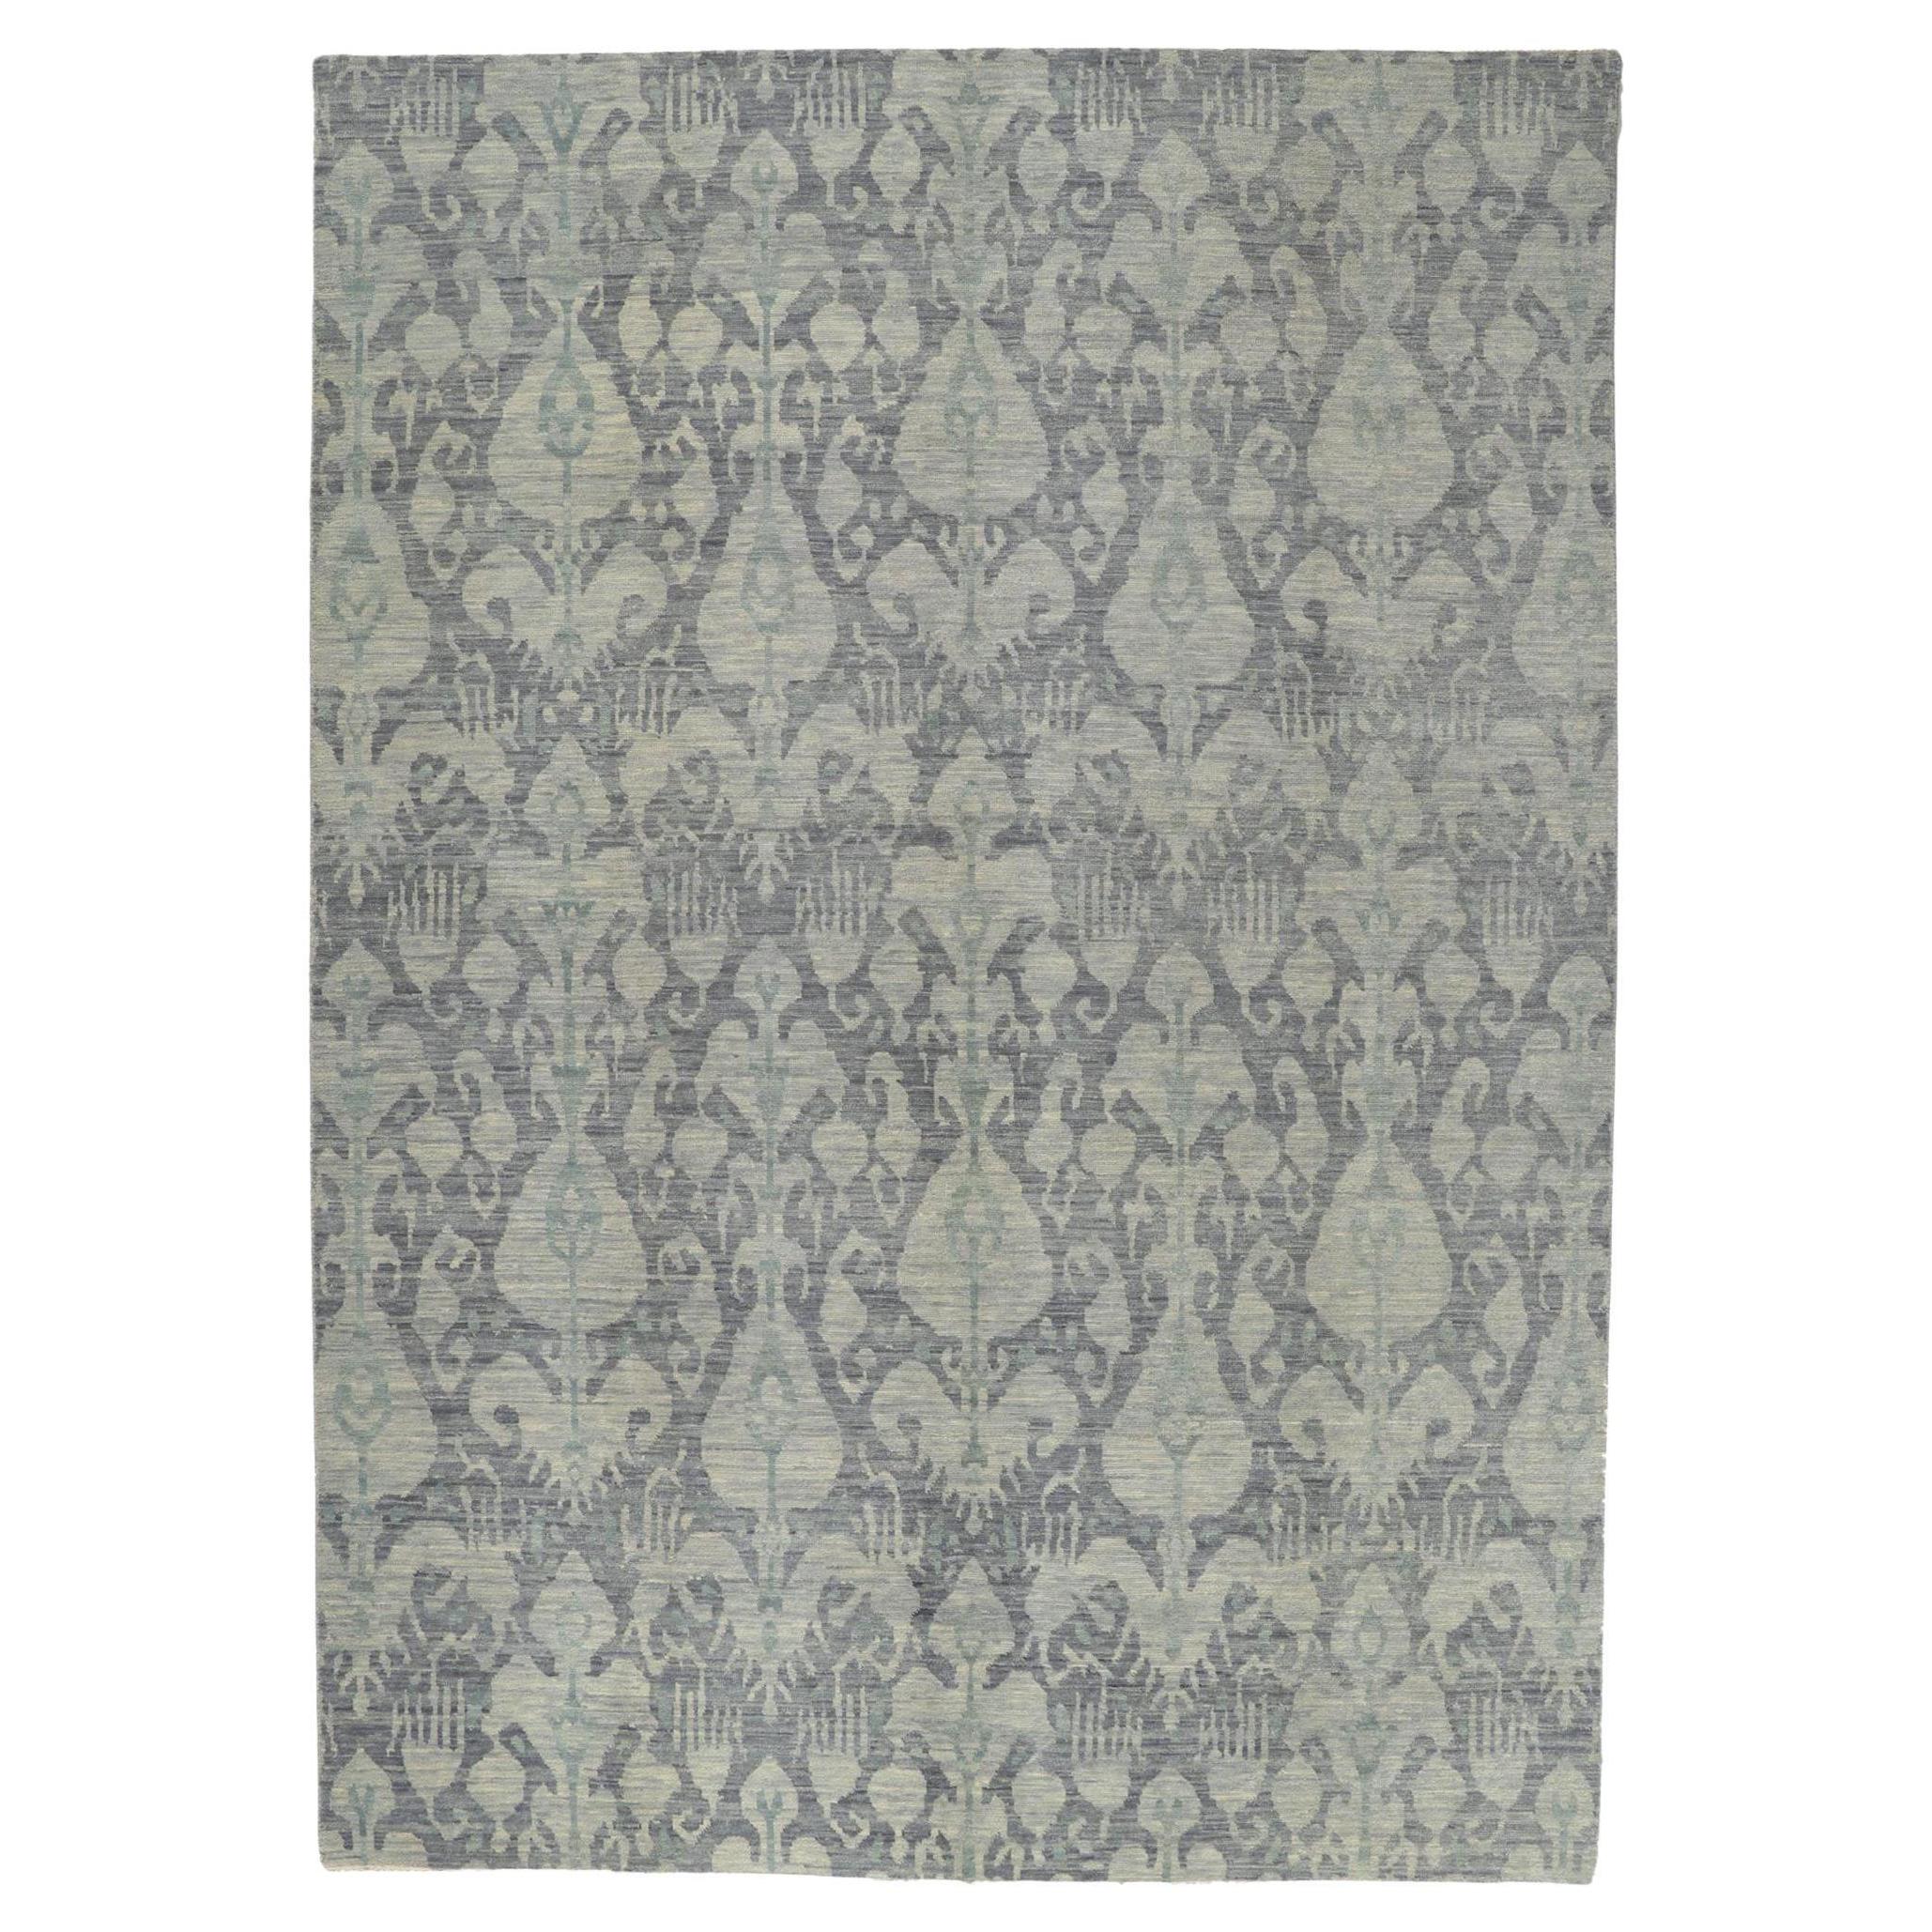 New Transitional Ikat Rug with Gray and Blue Earth-Tone Colors